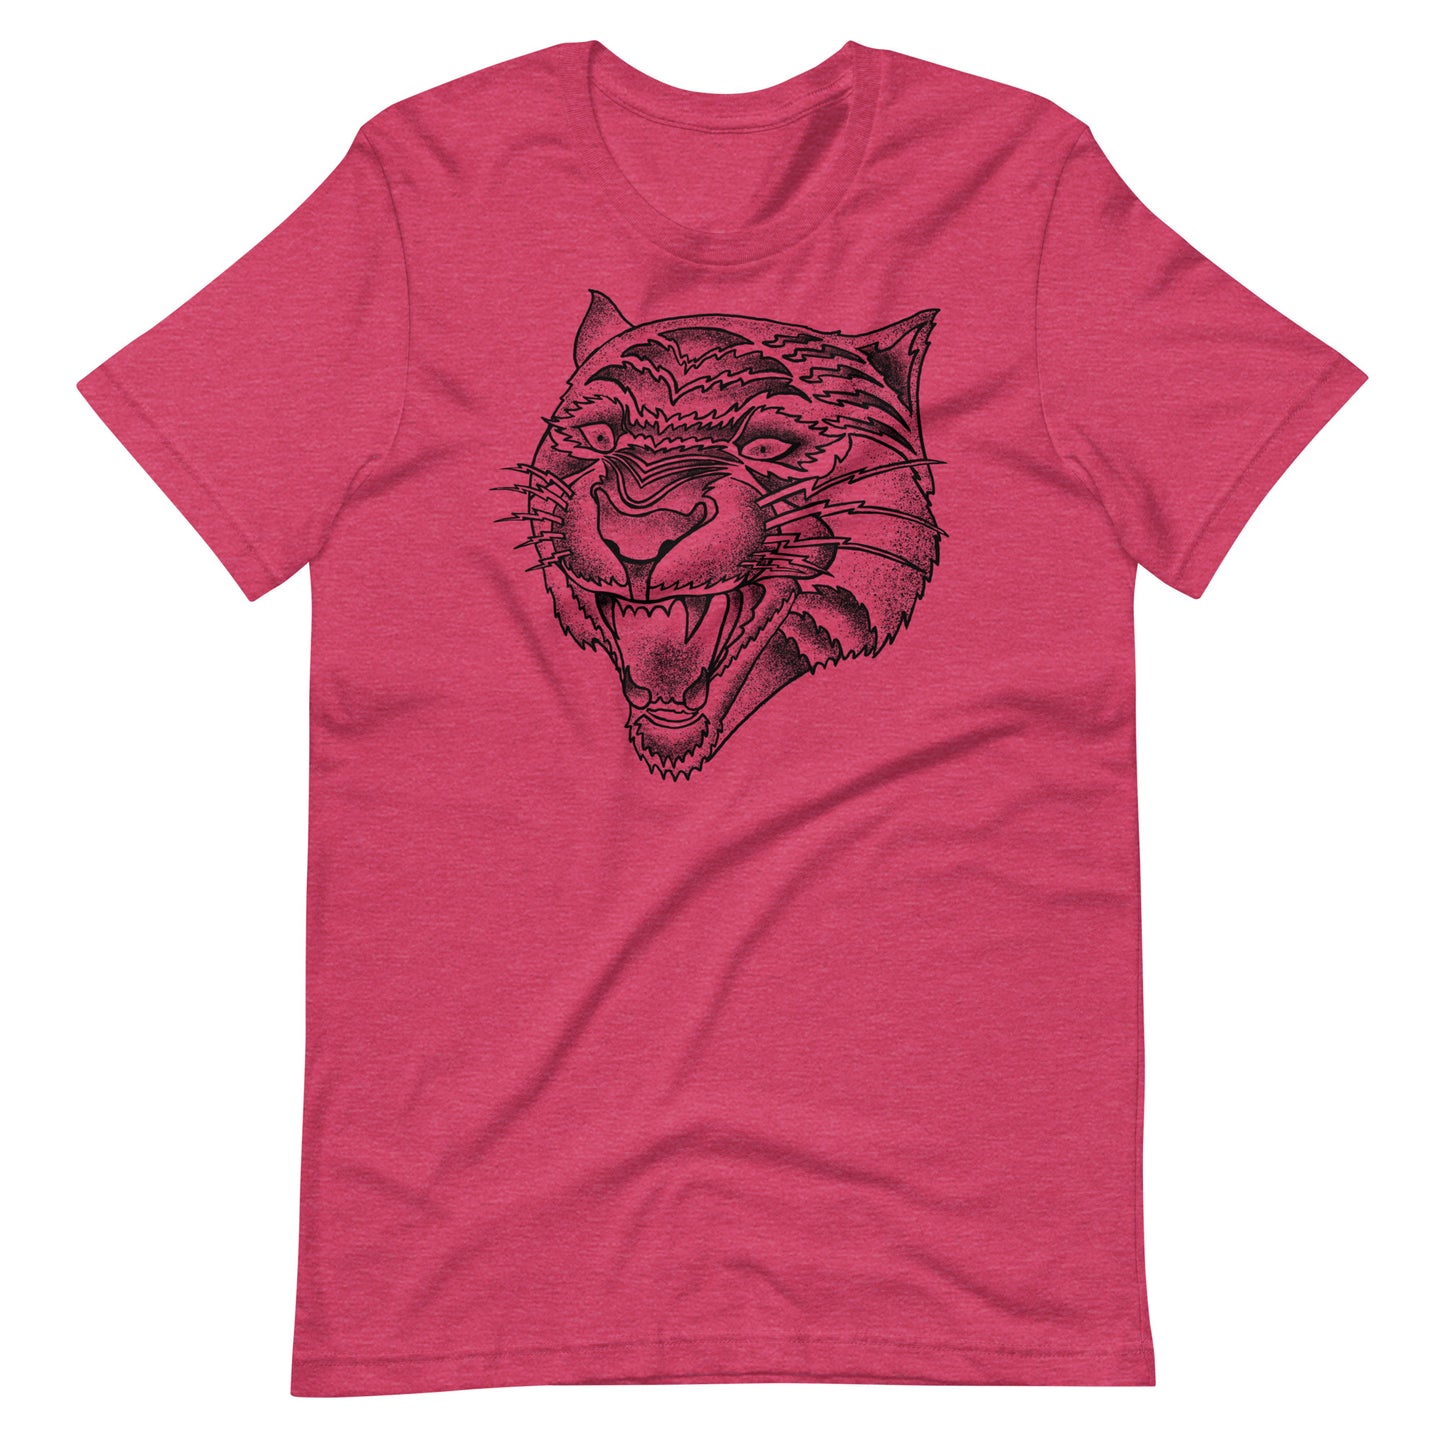 Panther Black - Men's t-shirt - Heather Raspberry Front